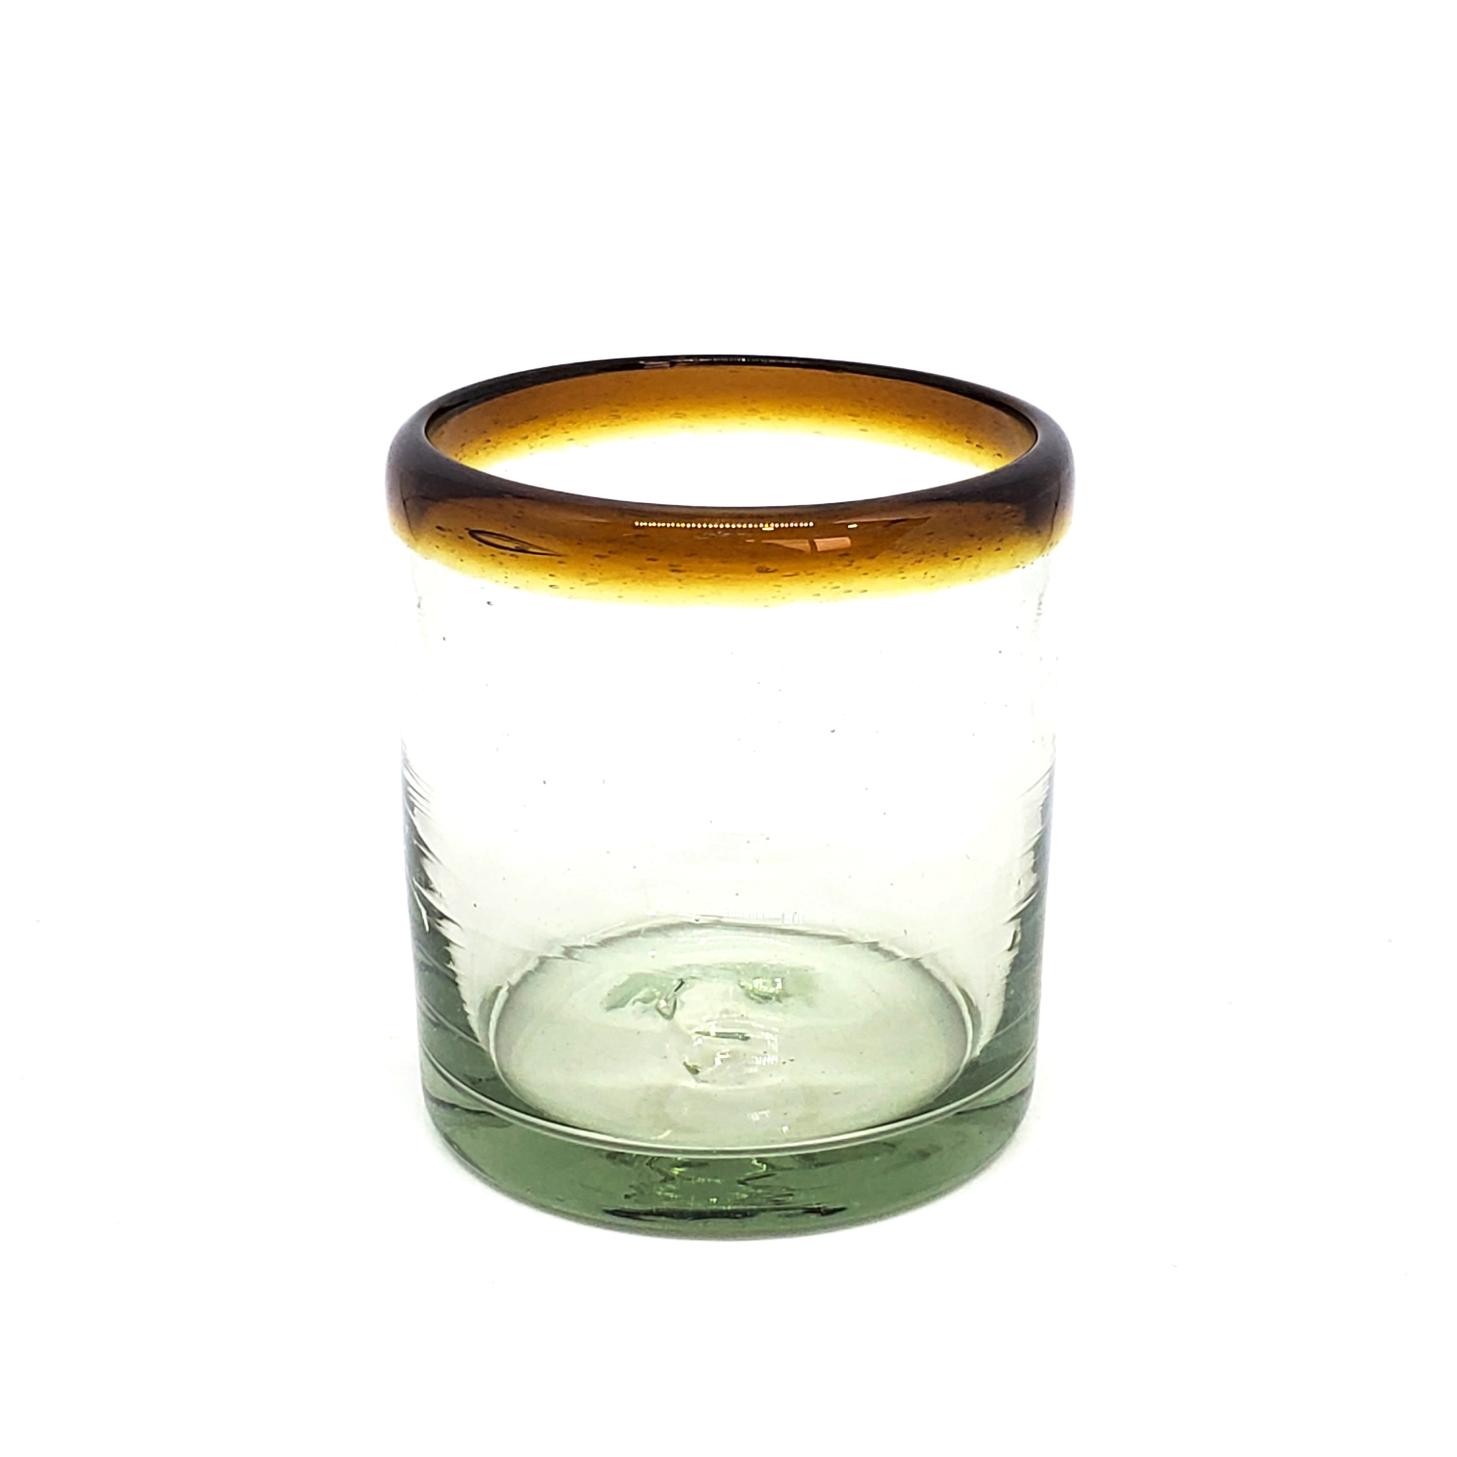 Sale Items / Amber Rim 8 oz DOF Rock Glasses  / These Double Old Fashioned glasses deliver a classic touch to your favorite drink on the rocks.